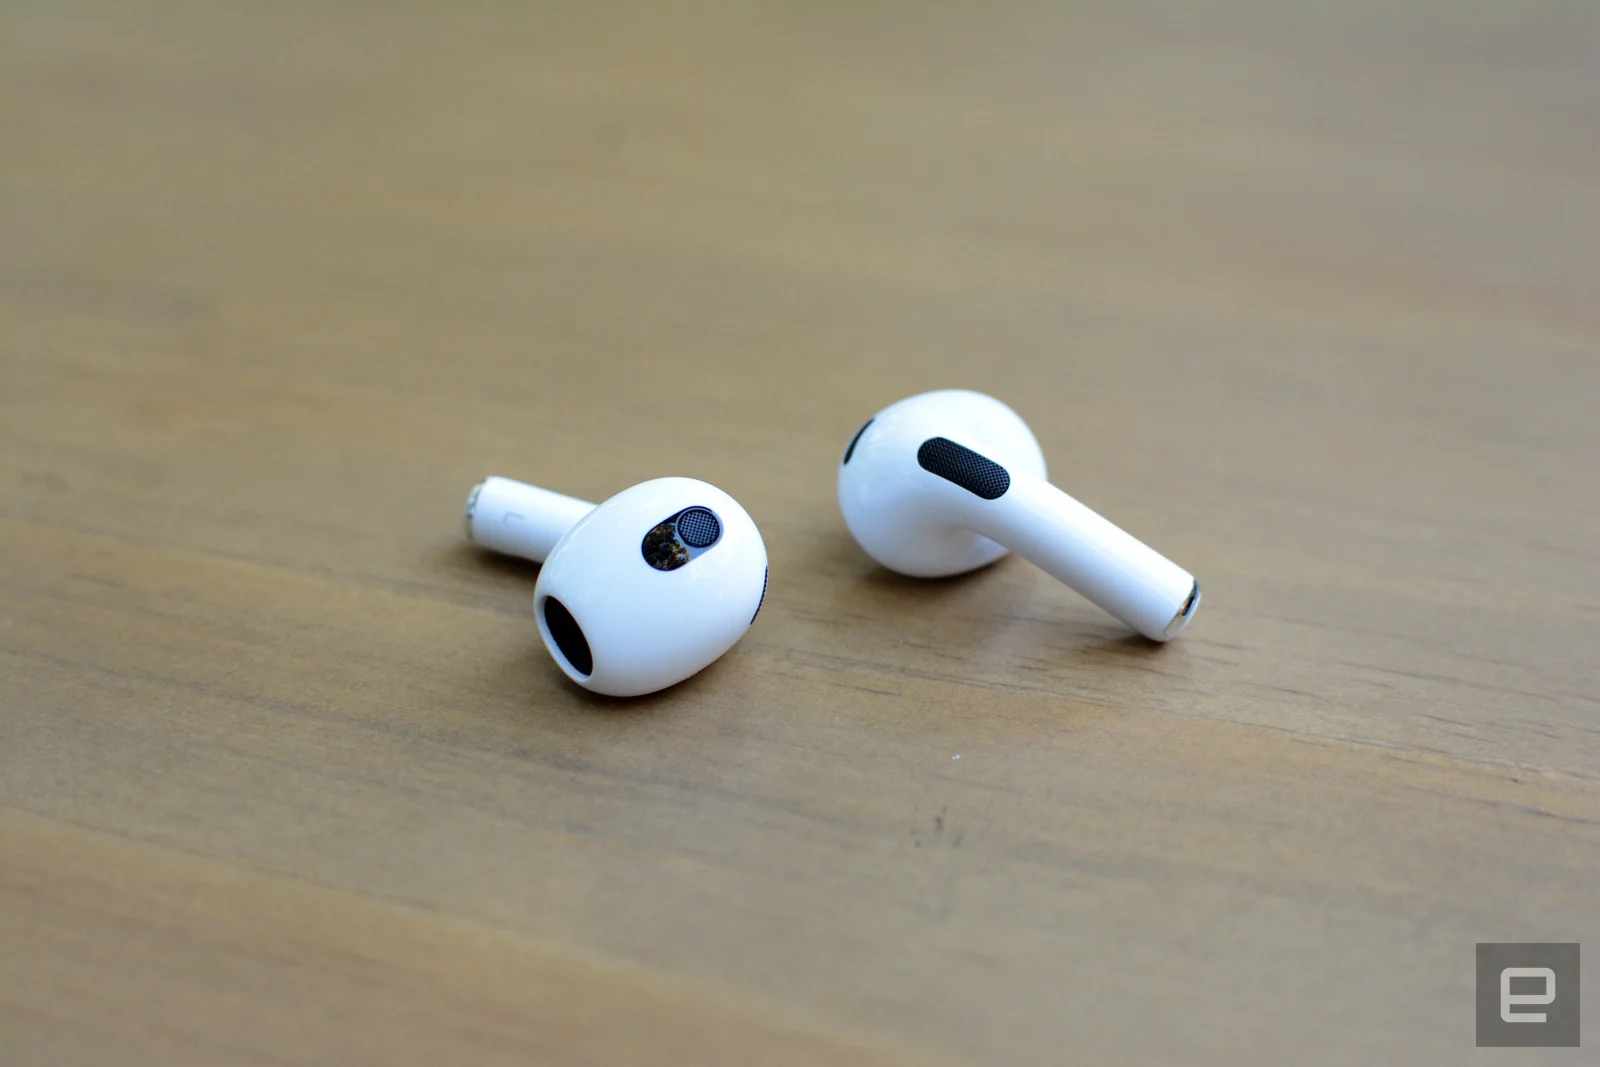 Apple totally overhauled AirPods for the third-generation version with the biggest changes coming in the design and audio quality.